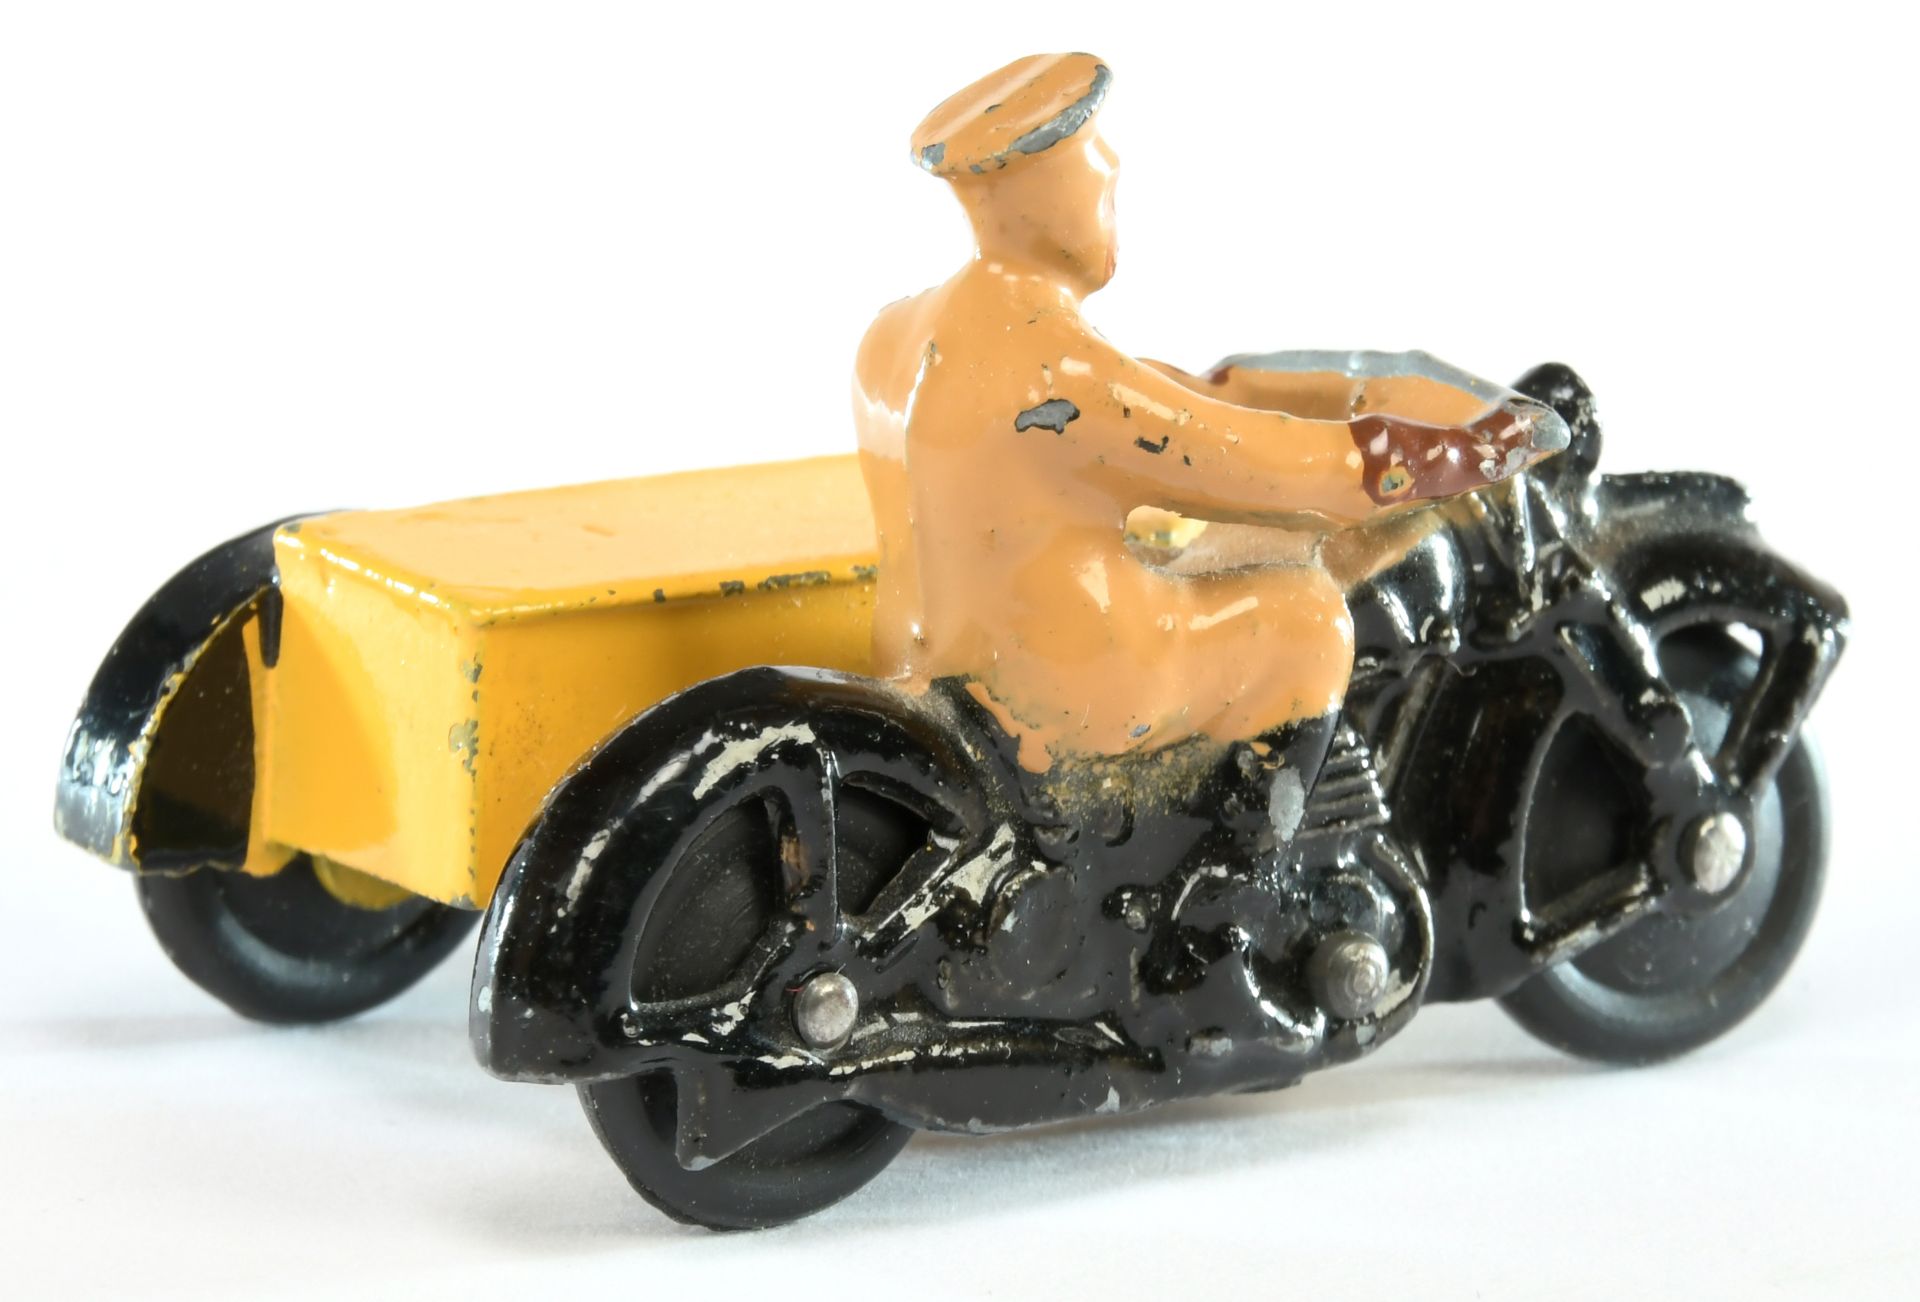 Dinky Toys 272 "ANWB" Motorcycle and Sidecar Export Issue - Yellow and Black with tan rider and s... - Image 2 of 2